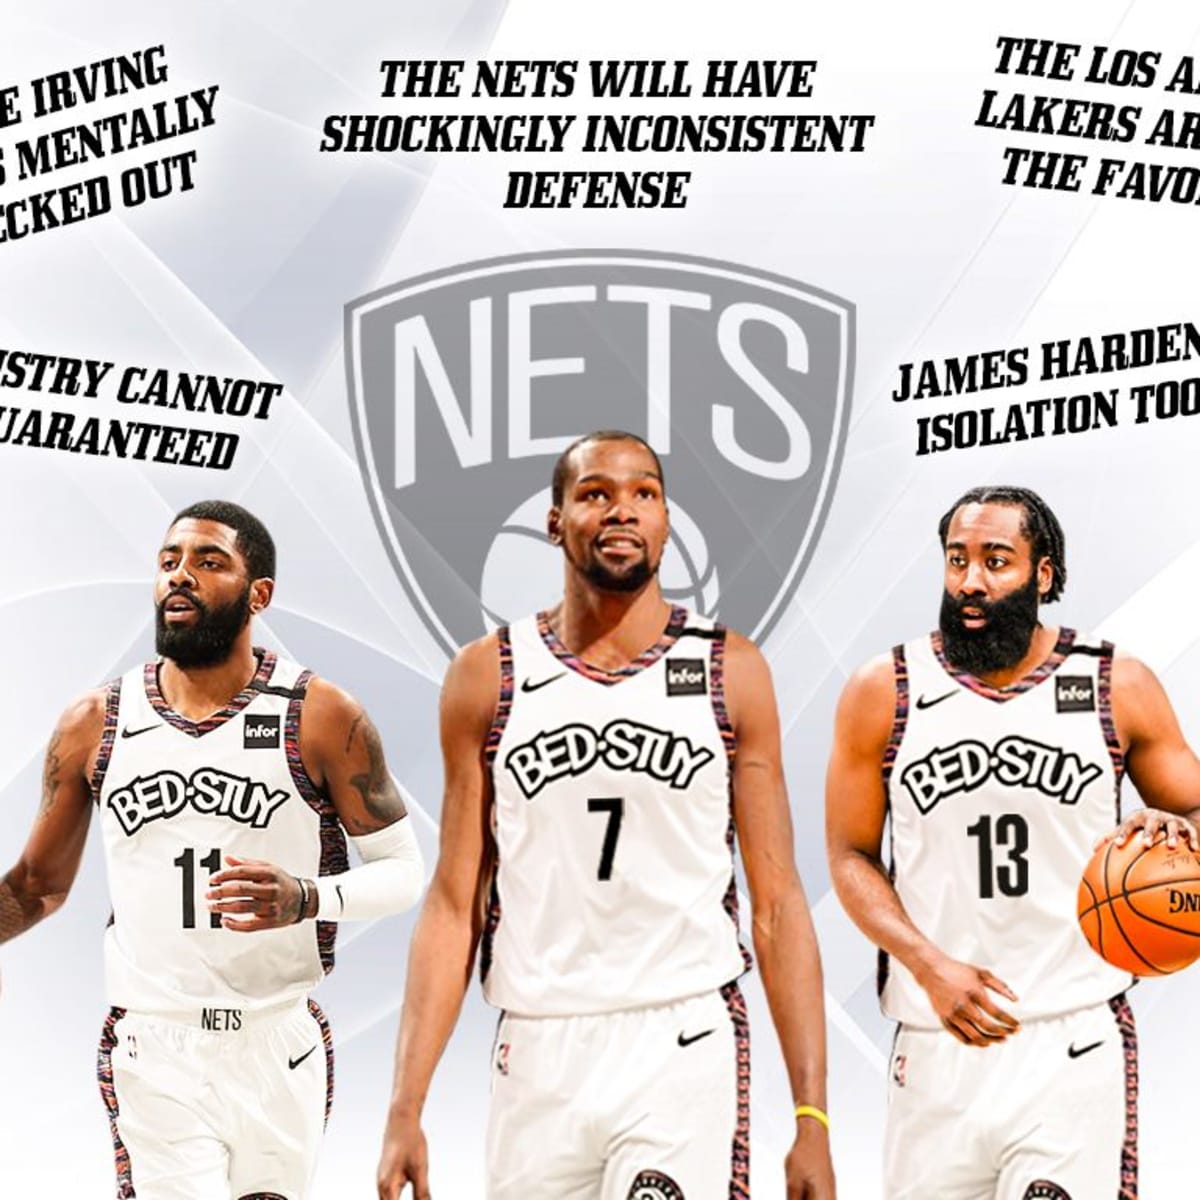 NBA Notebook: Nets can compete without Durant; Lakers should